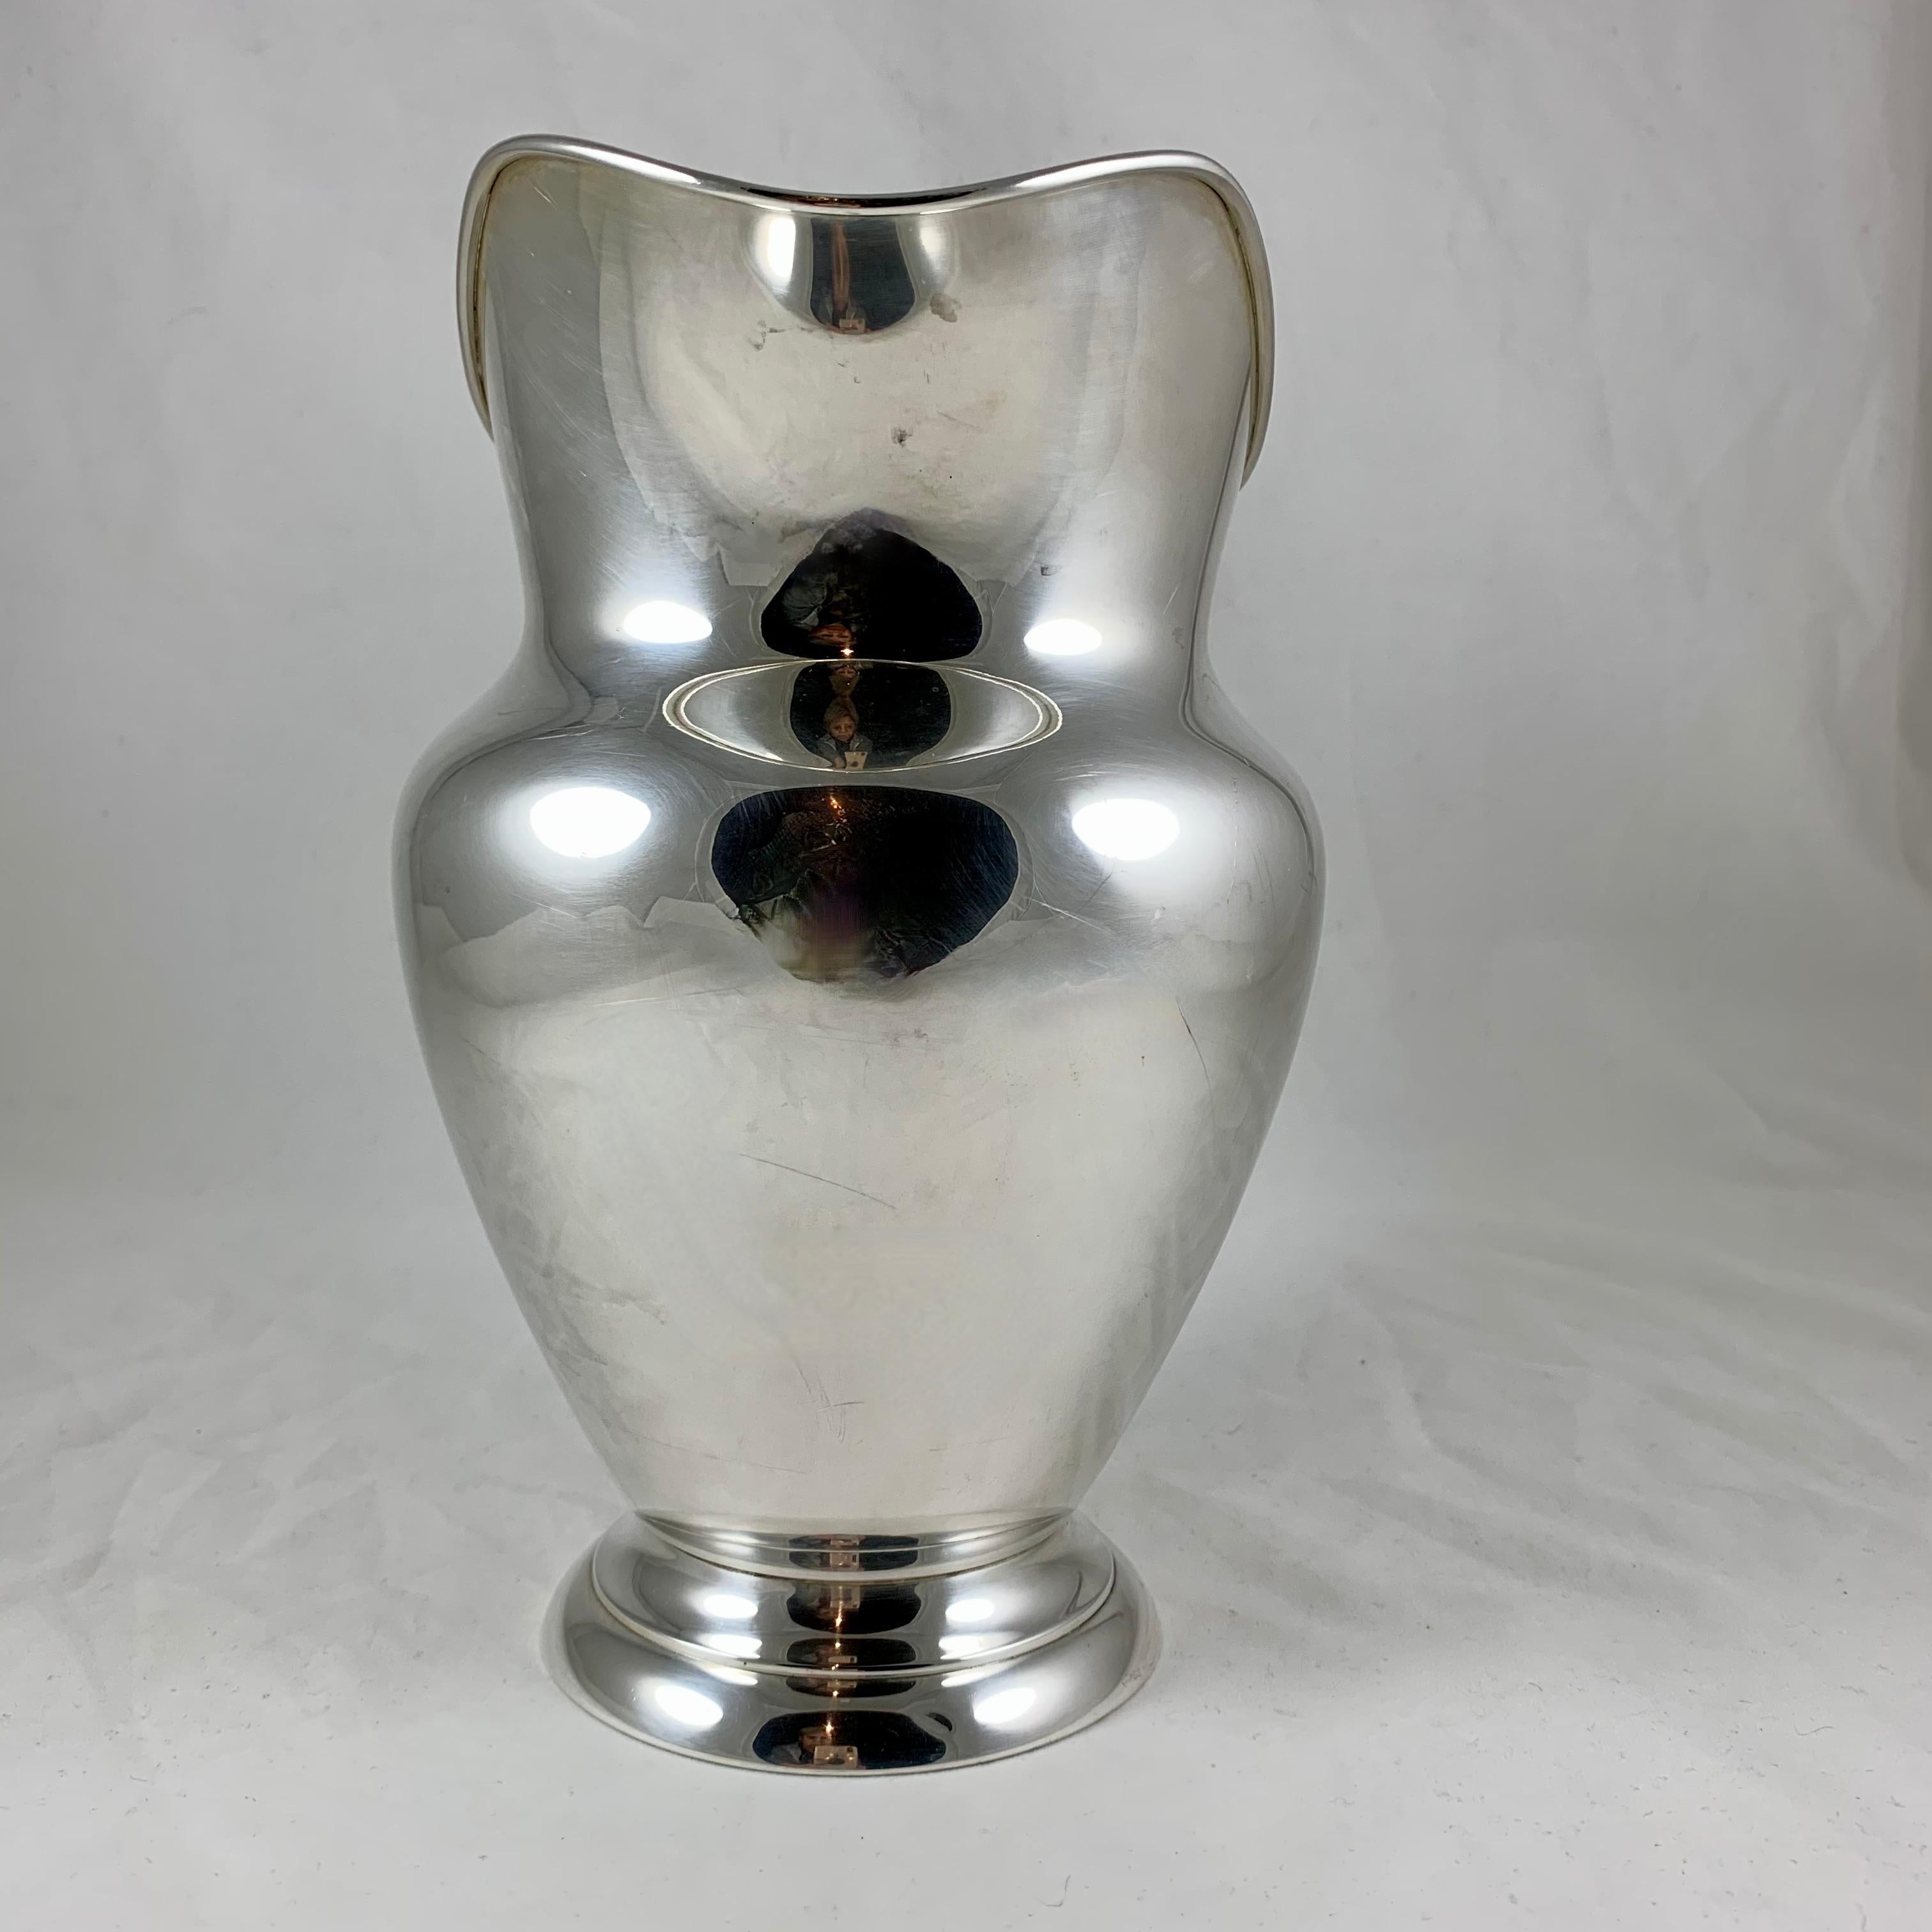 Metalwork Gorham American Sterling Silver Large Water Pitcher, Dated 1959